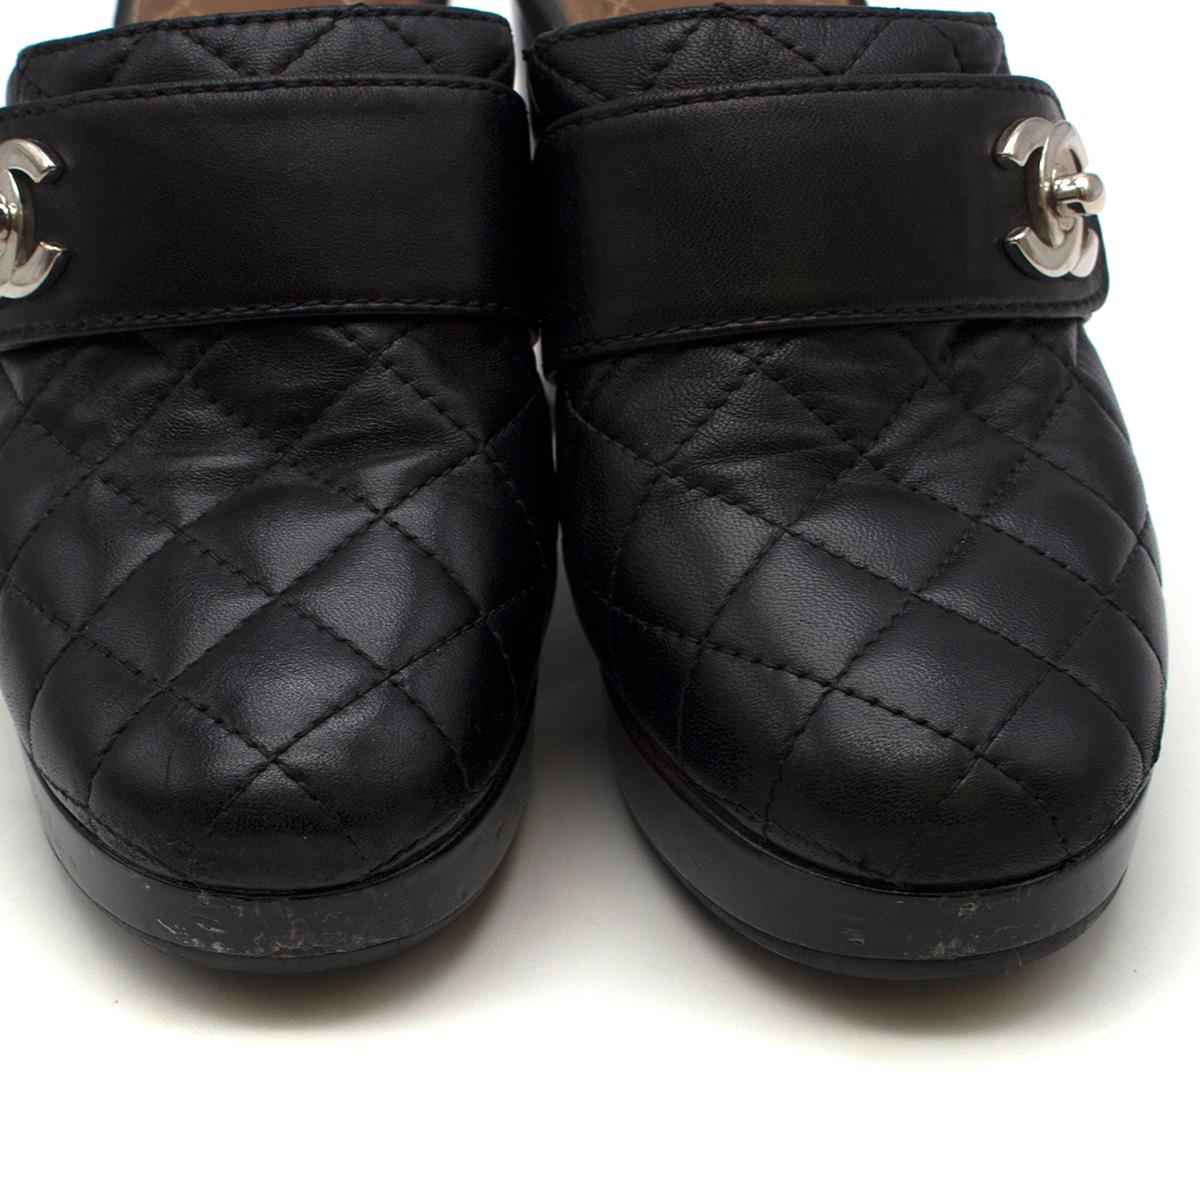 Chanel Black Quilted Leather Clogs SIZE 37  1